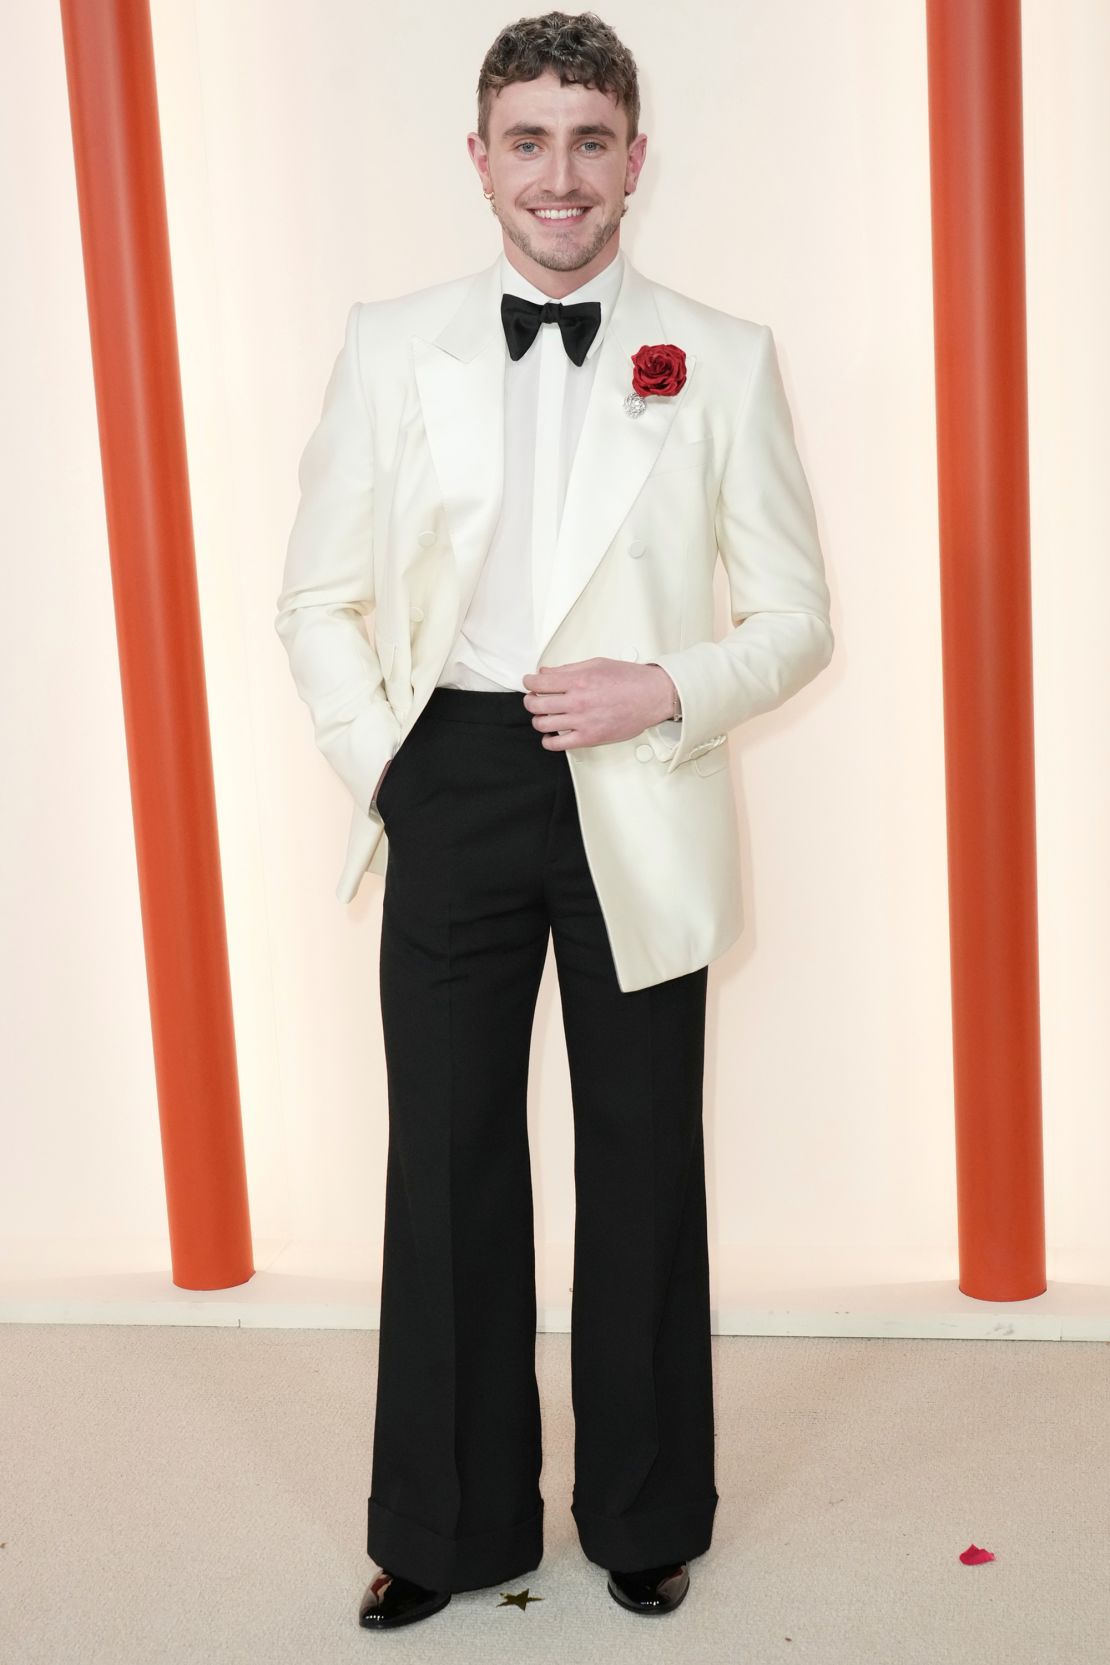 Paul Mescal was one of several men to wear cream or light-colored tuxedo jackets. 